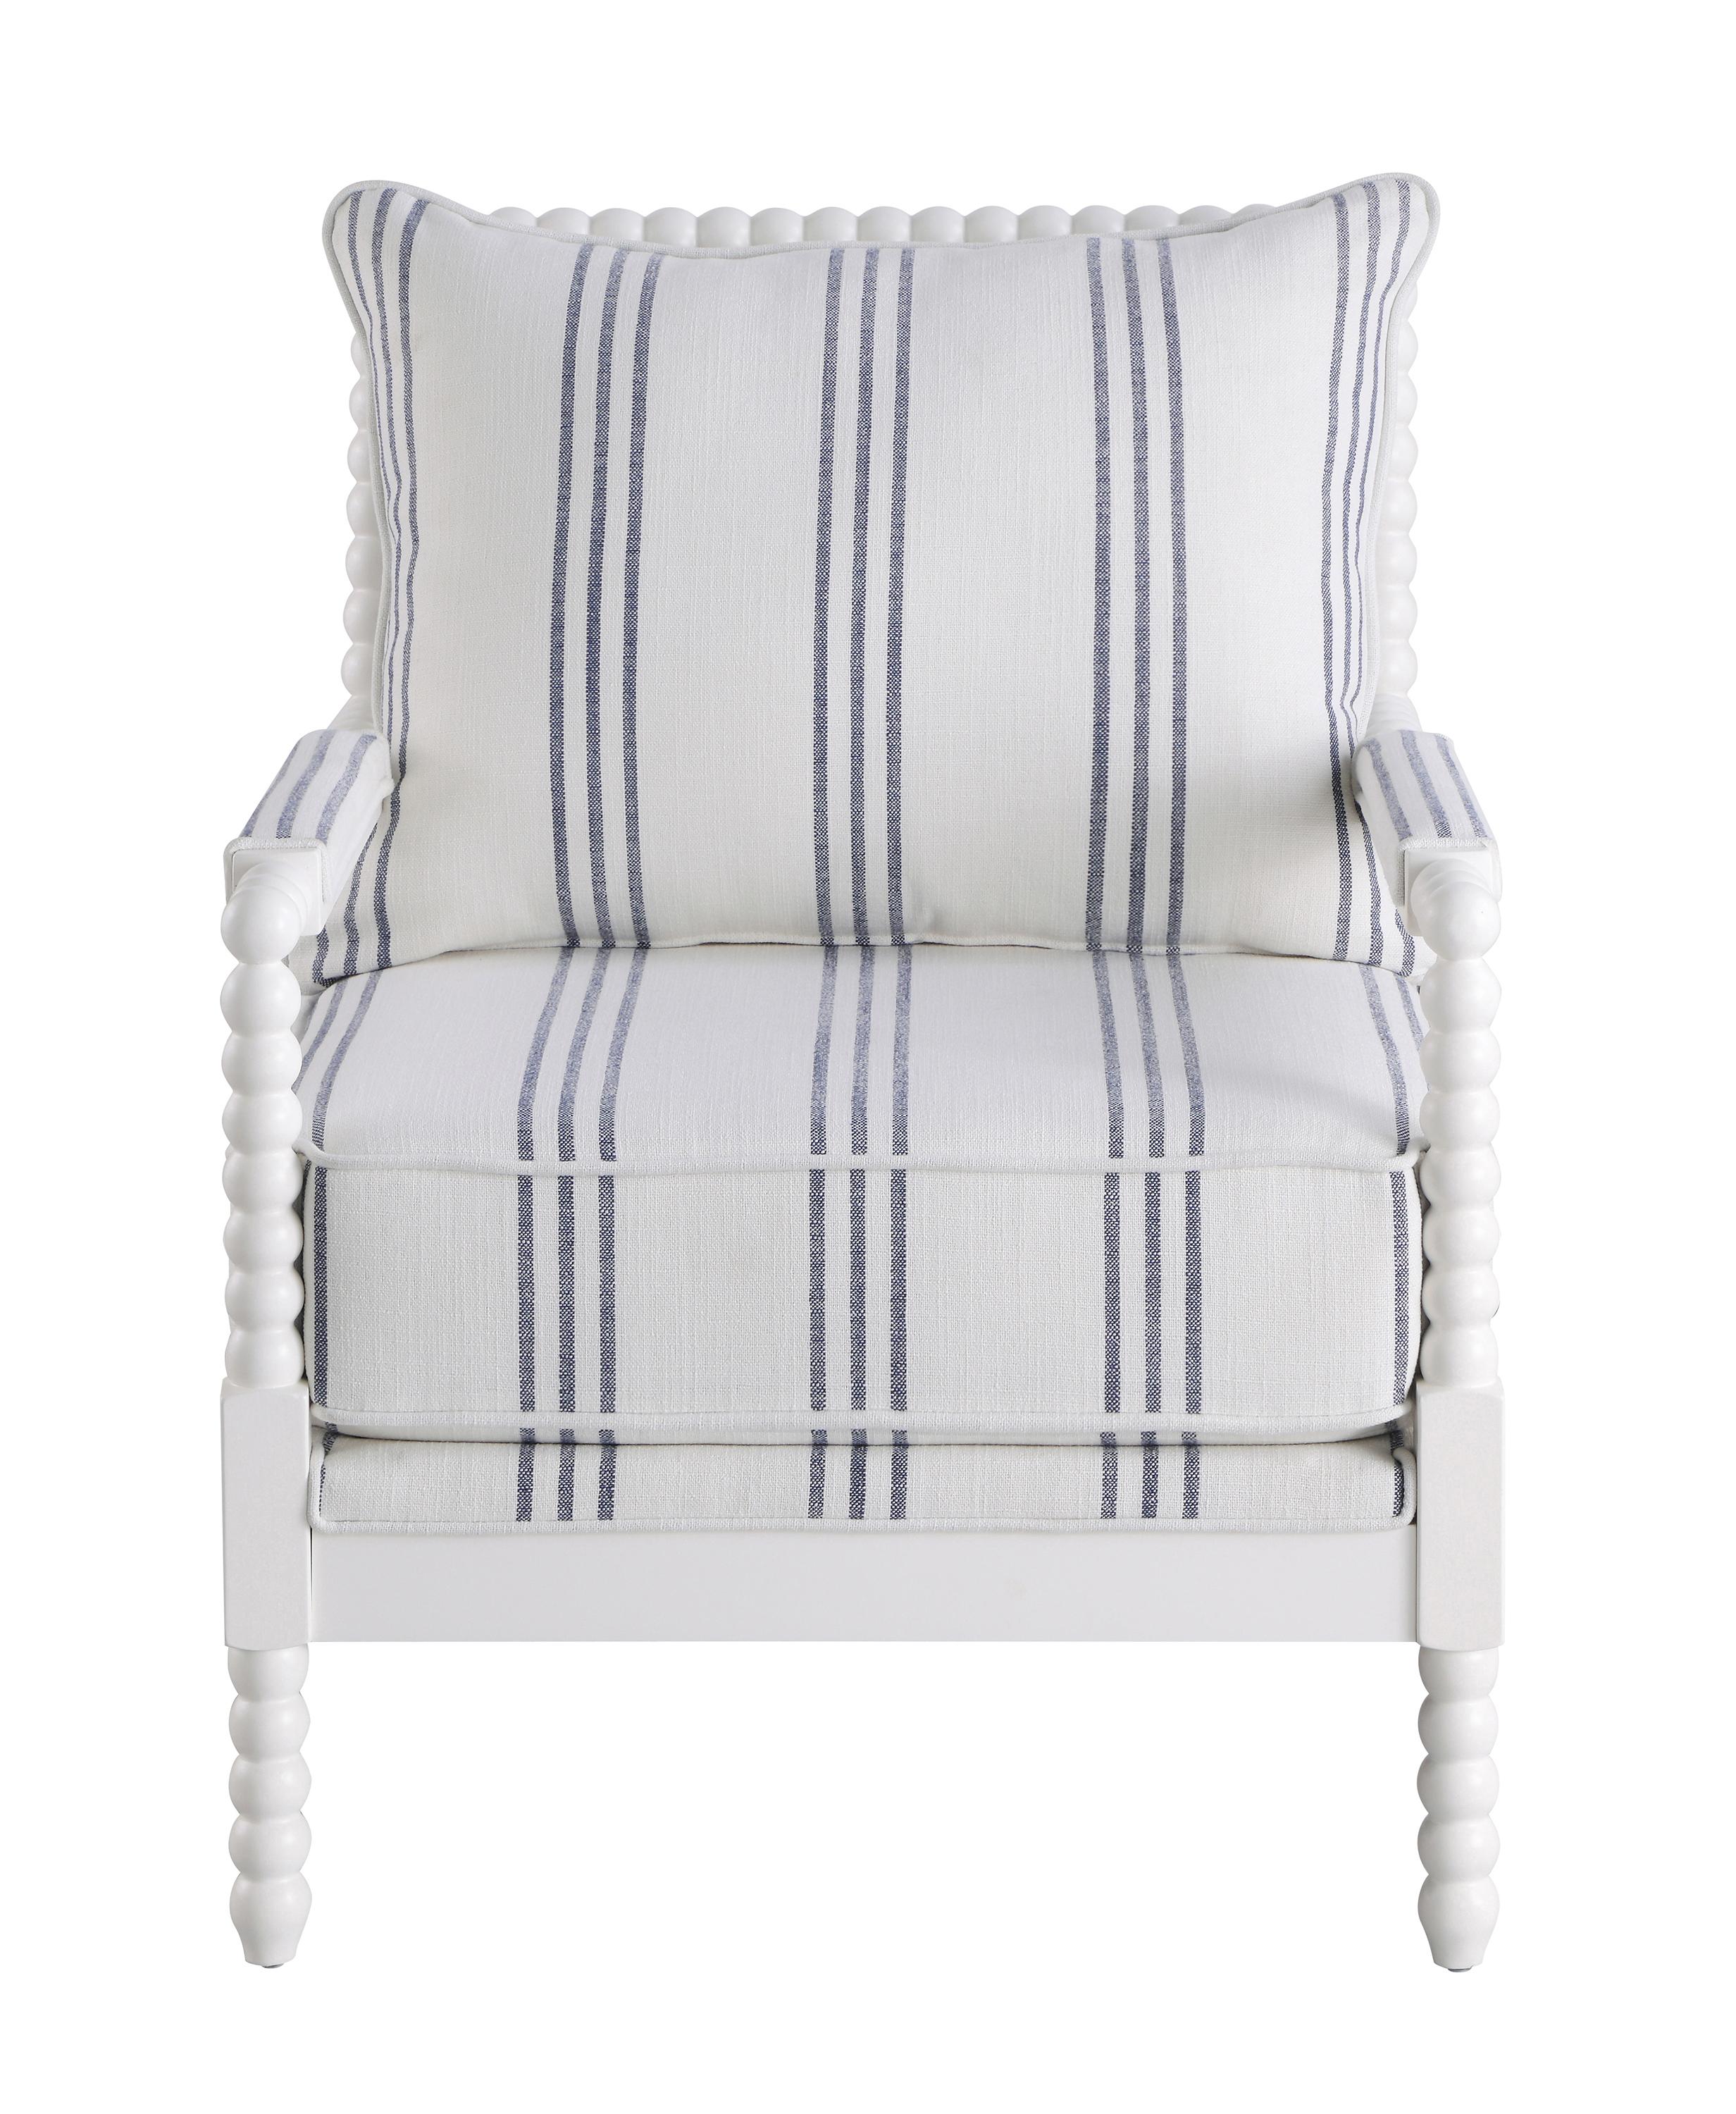 Transitional Accent Chair 903835 903835 in White 